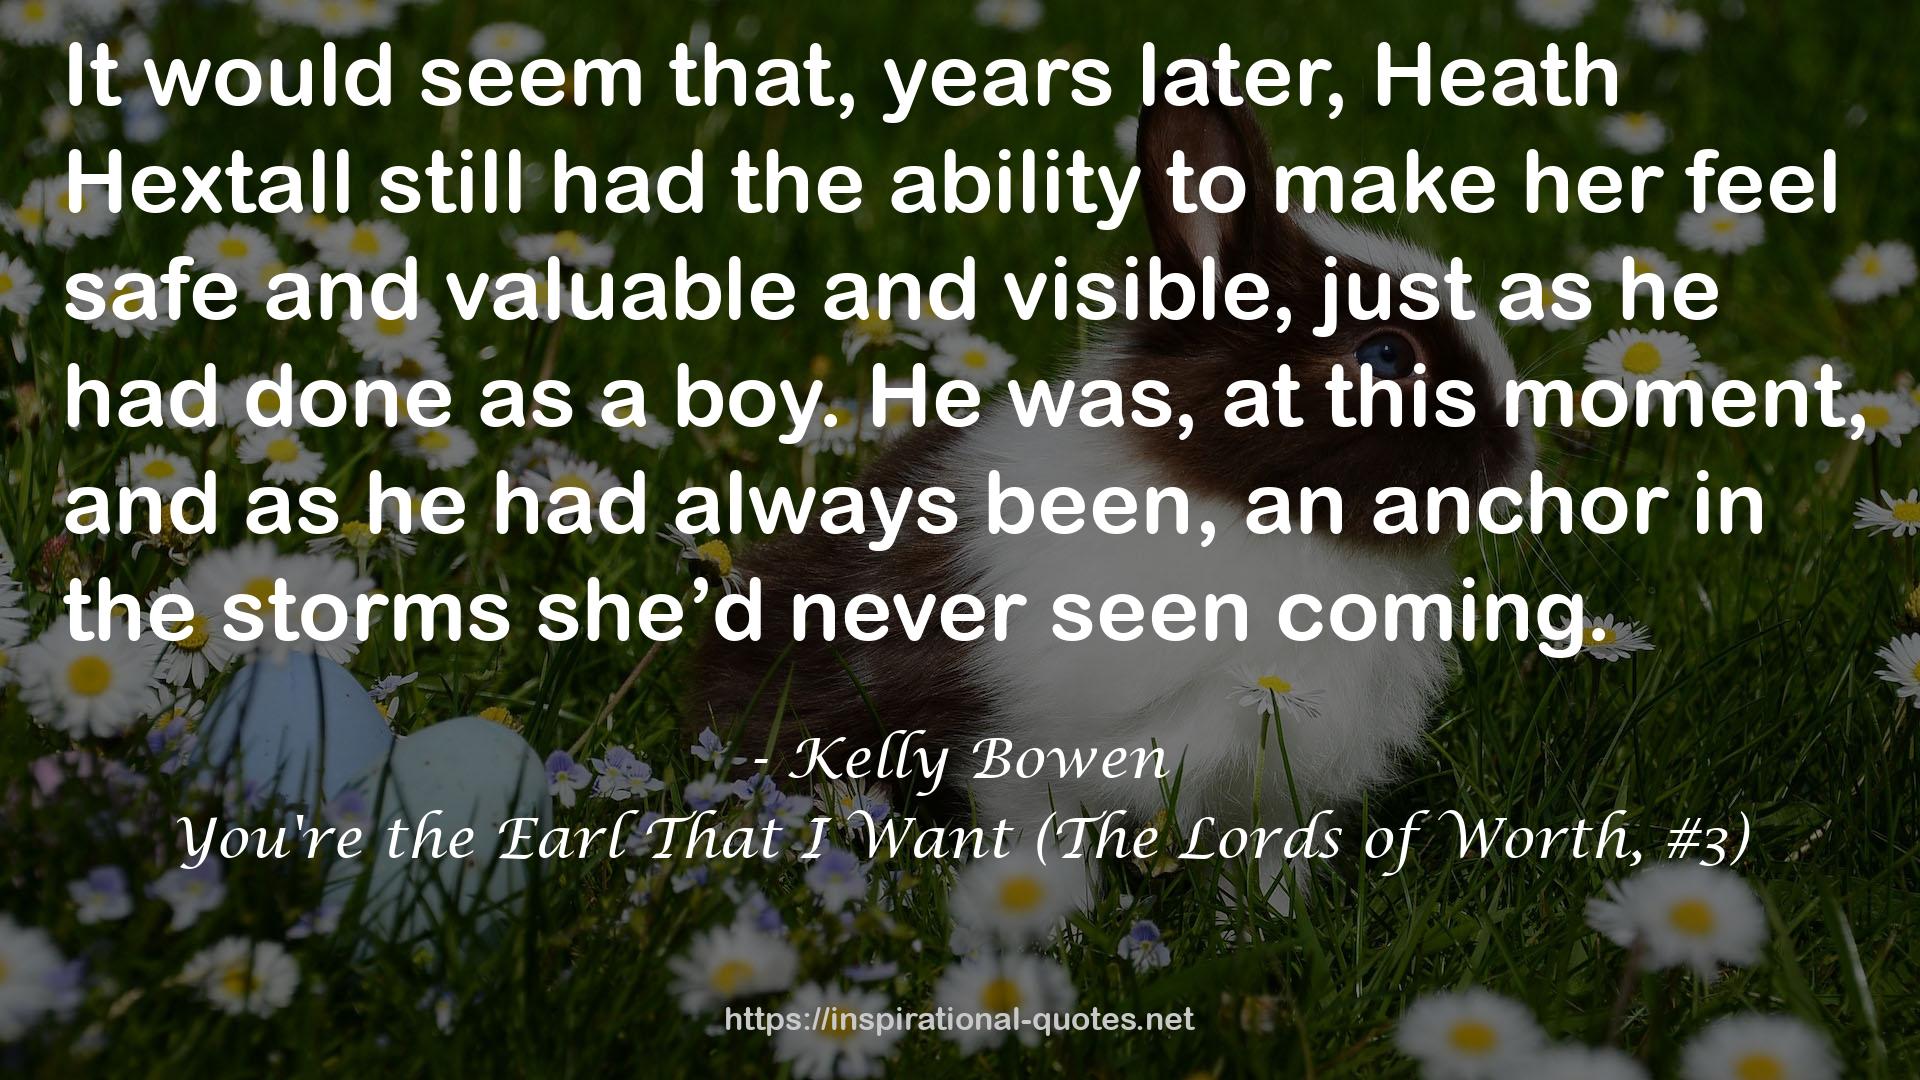 You're the Earl That I Want (The Lords of Worth, #3) QUOTES